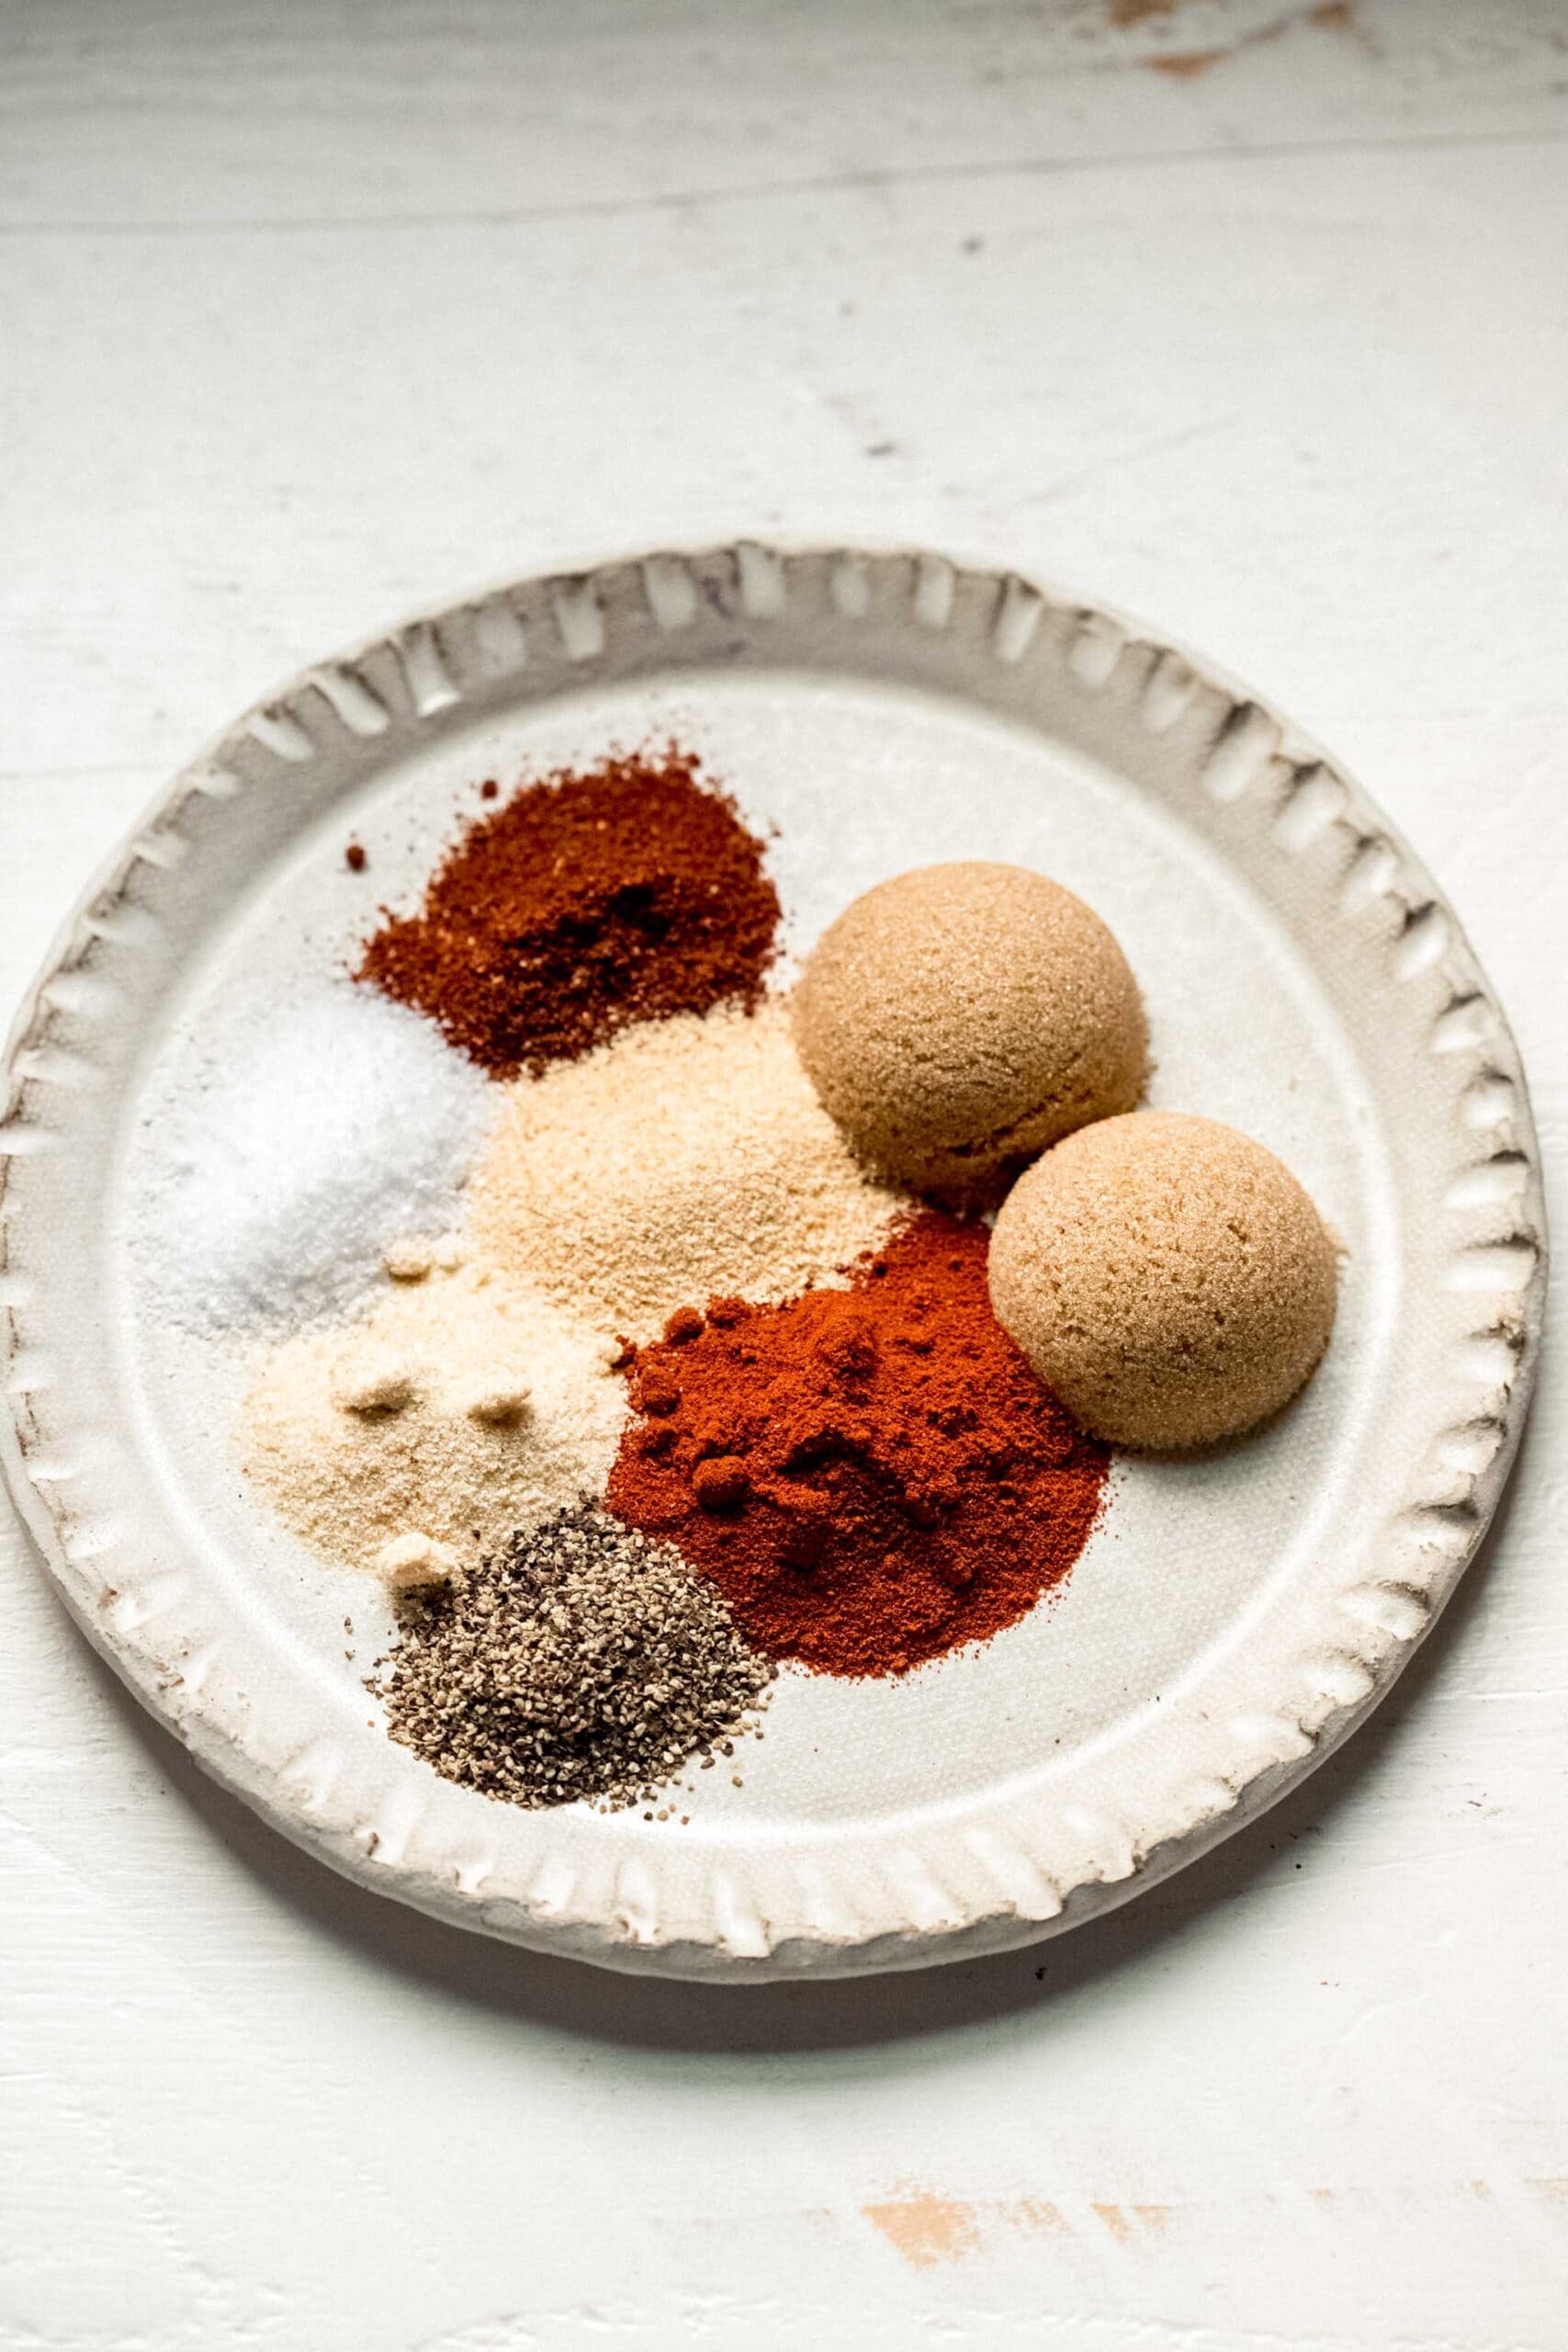 Spices for dry rub